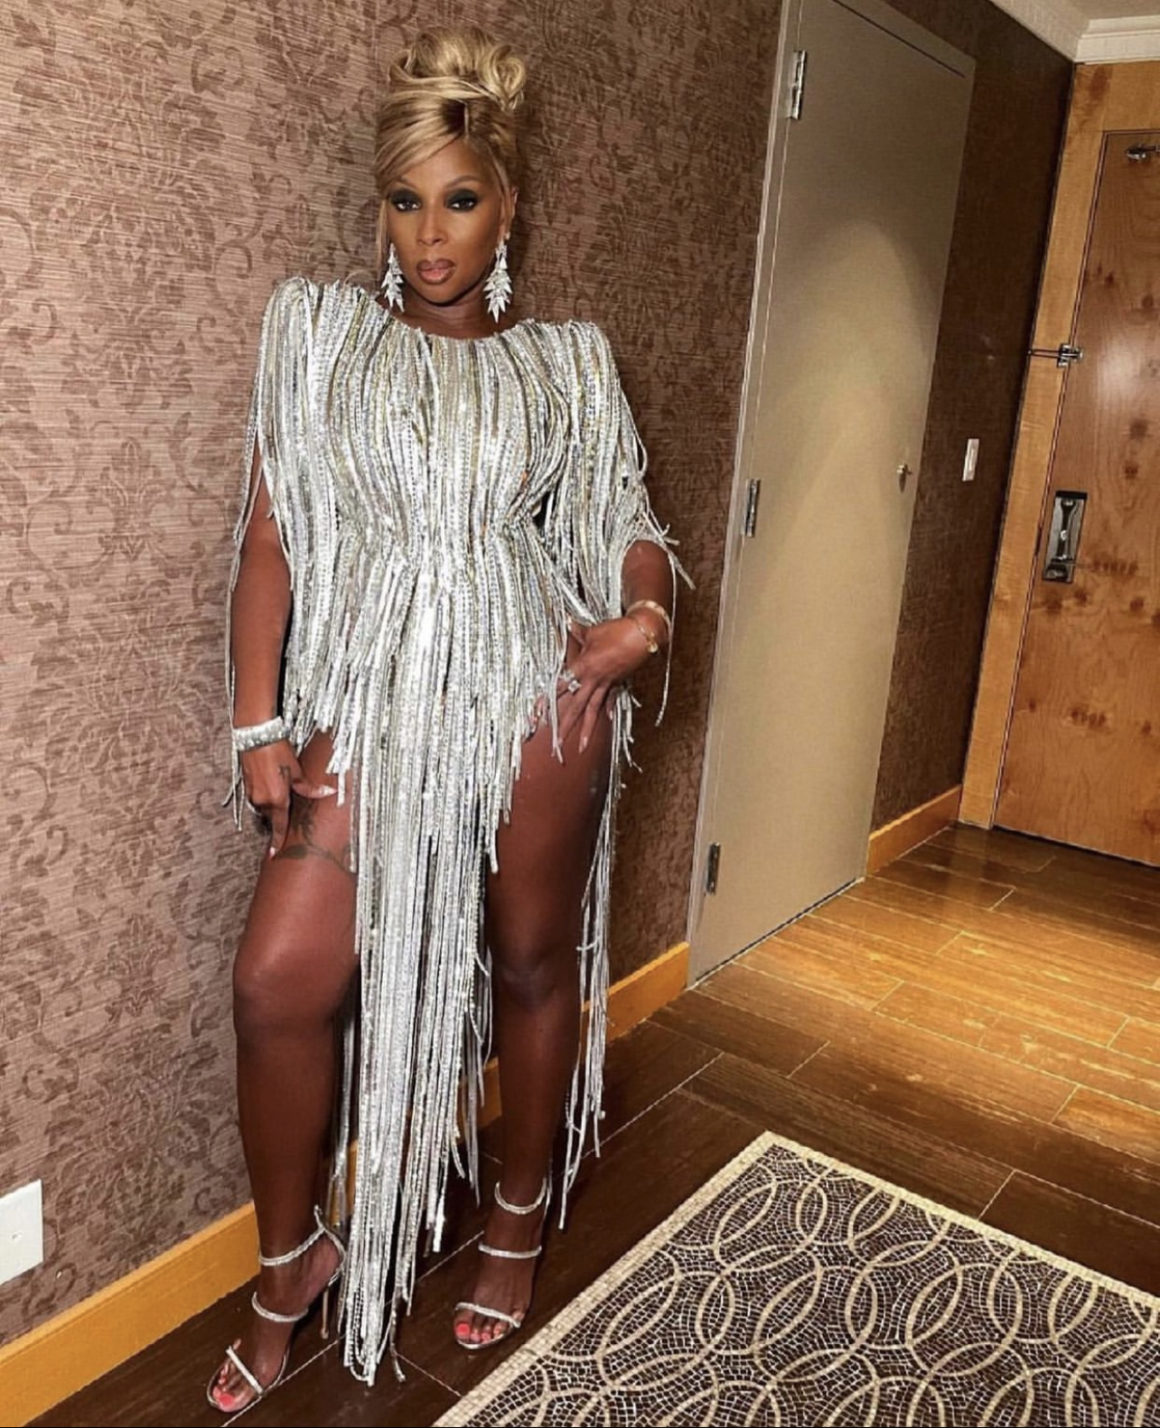 Mary J. Blige Attends the Premiere of Her Documentary ‘My Life Wearing Alexandre Vauthier Spring 2021 Crystal Fringe Gown